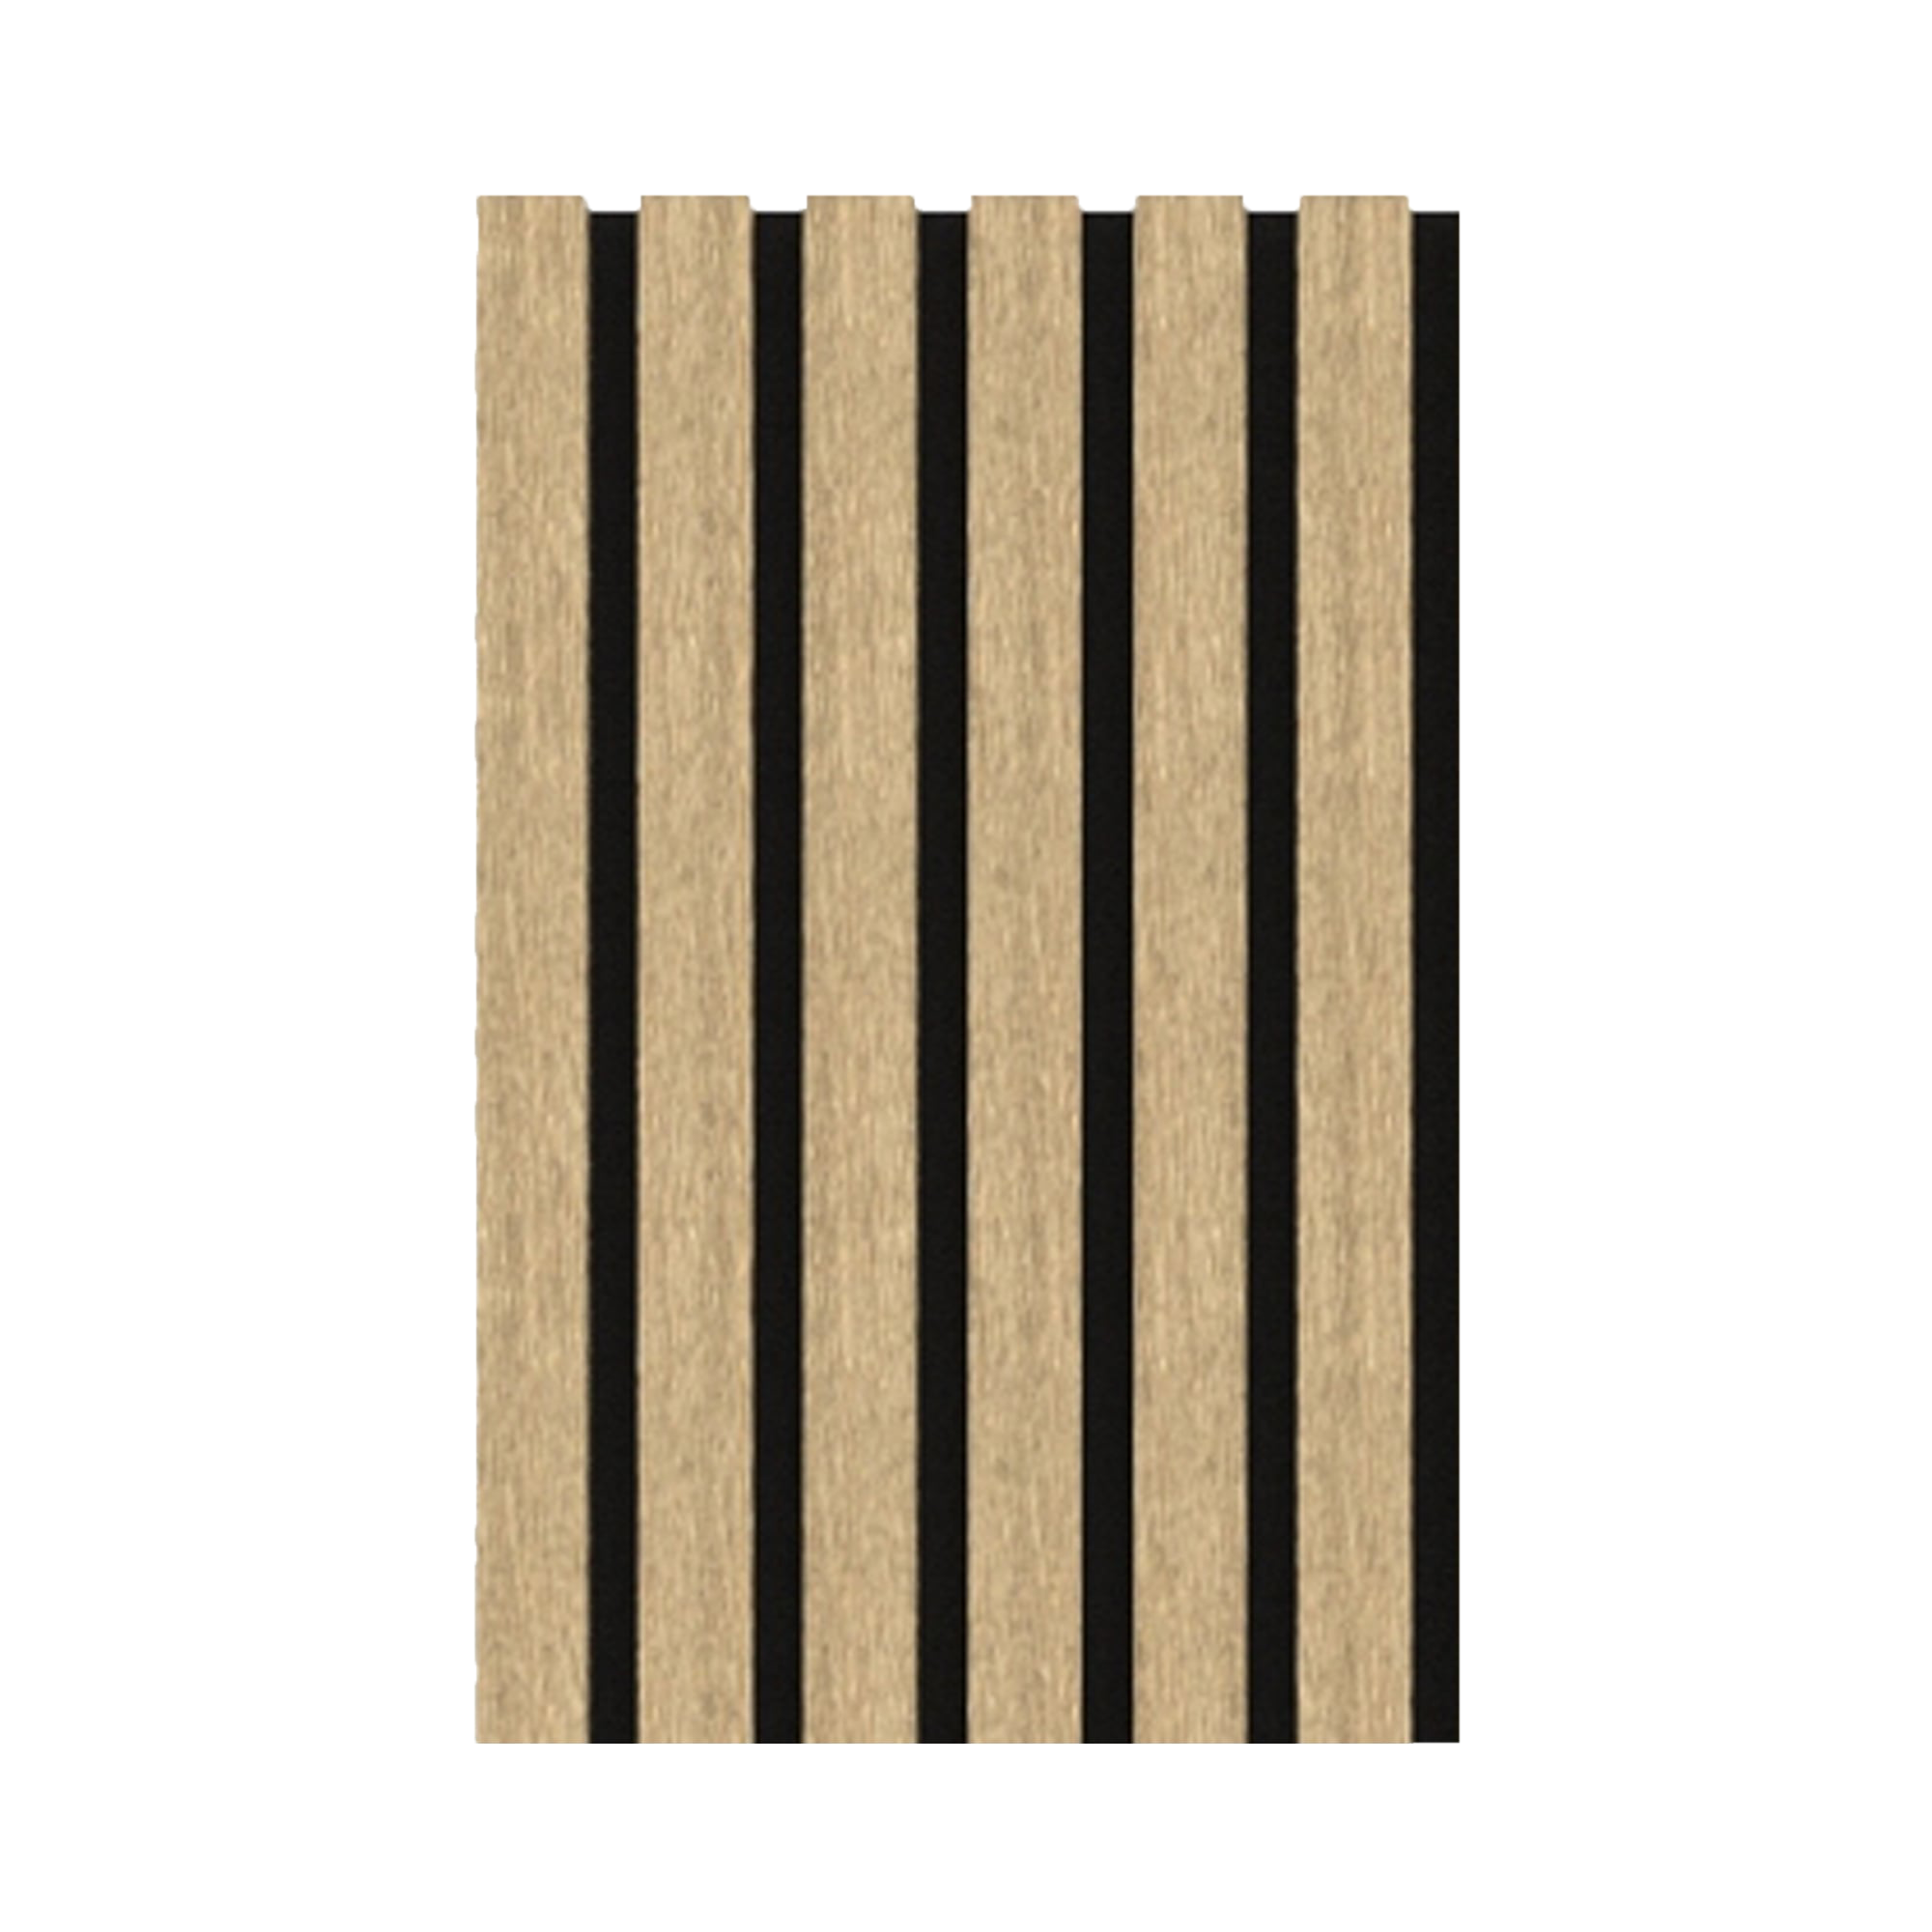 Sample Product 30x12.5x2.1 cm  Natural Acoustic Wood Wall Panels